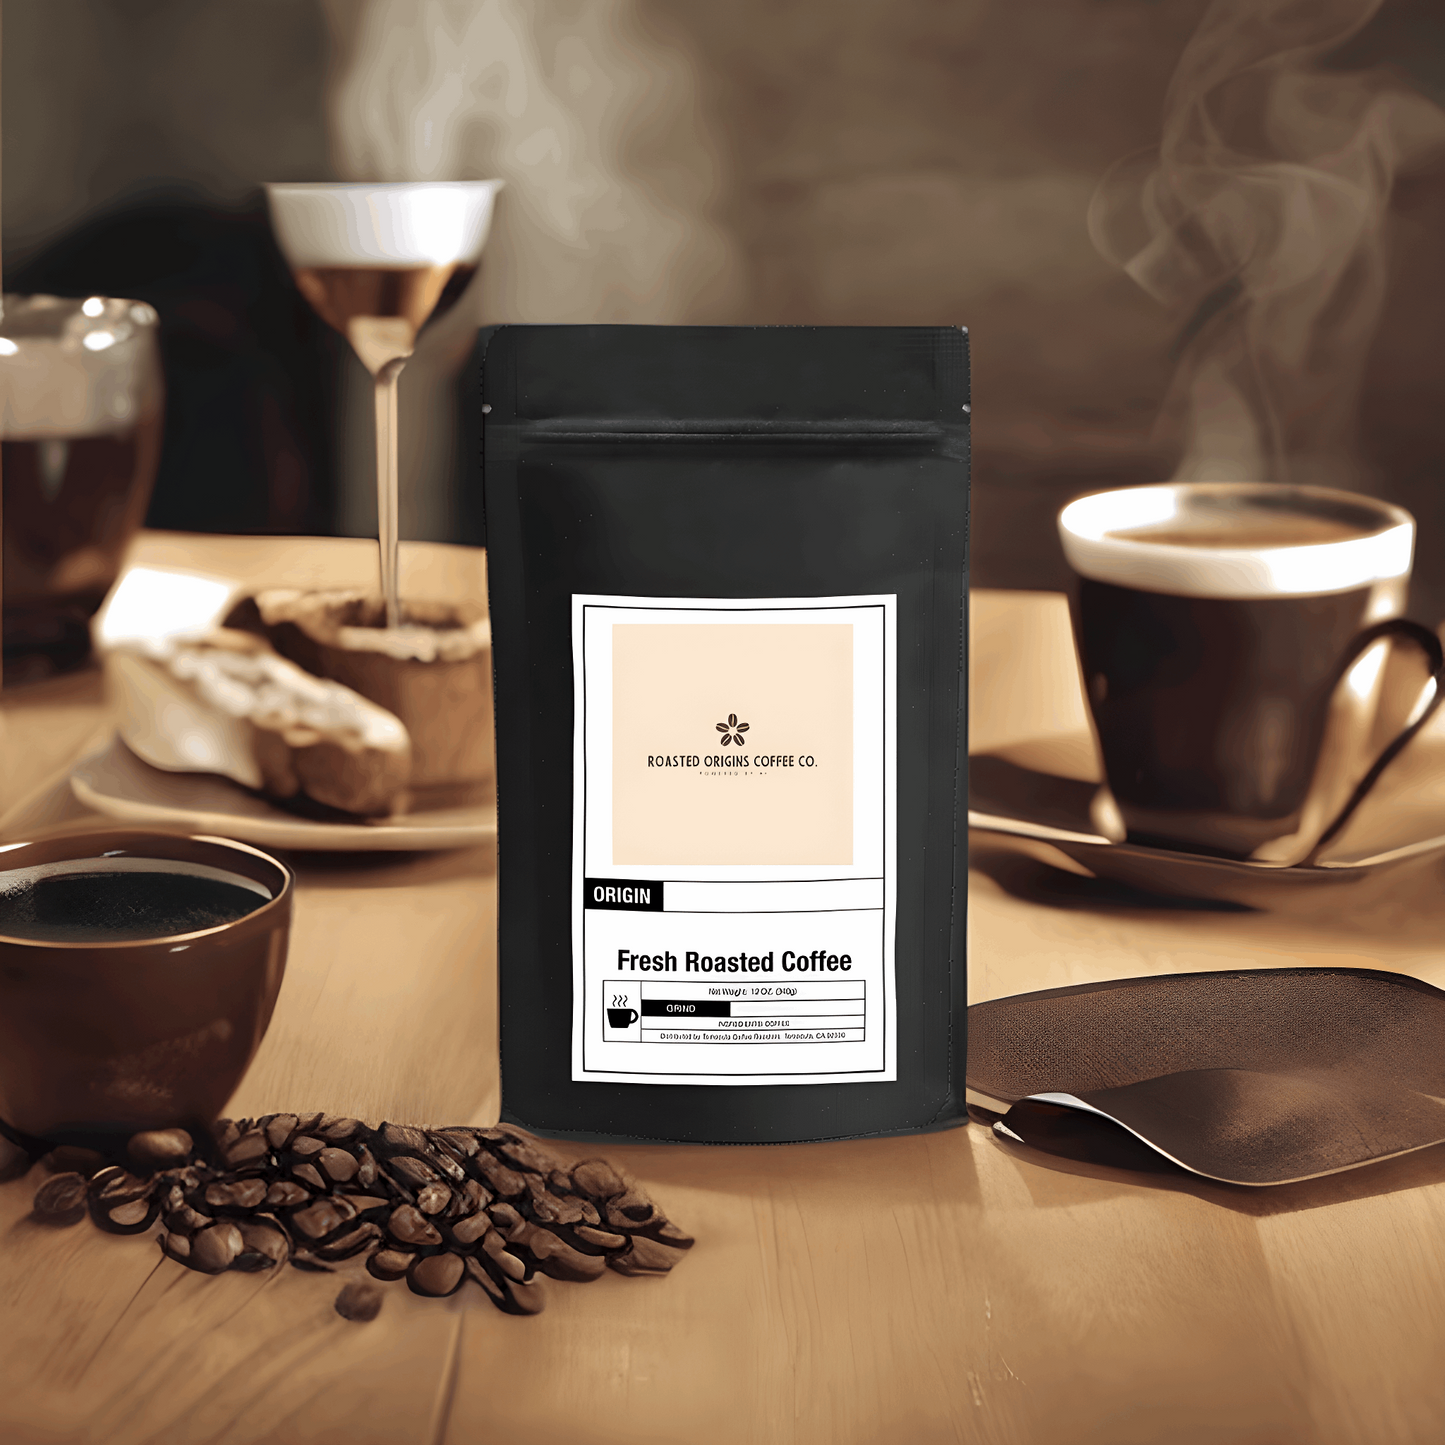 a bag of Latin American Blend coffee from roasted origins next to coffee beans